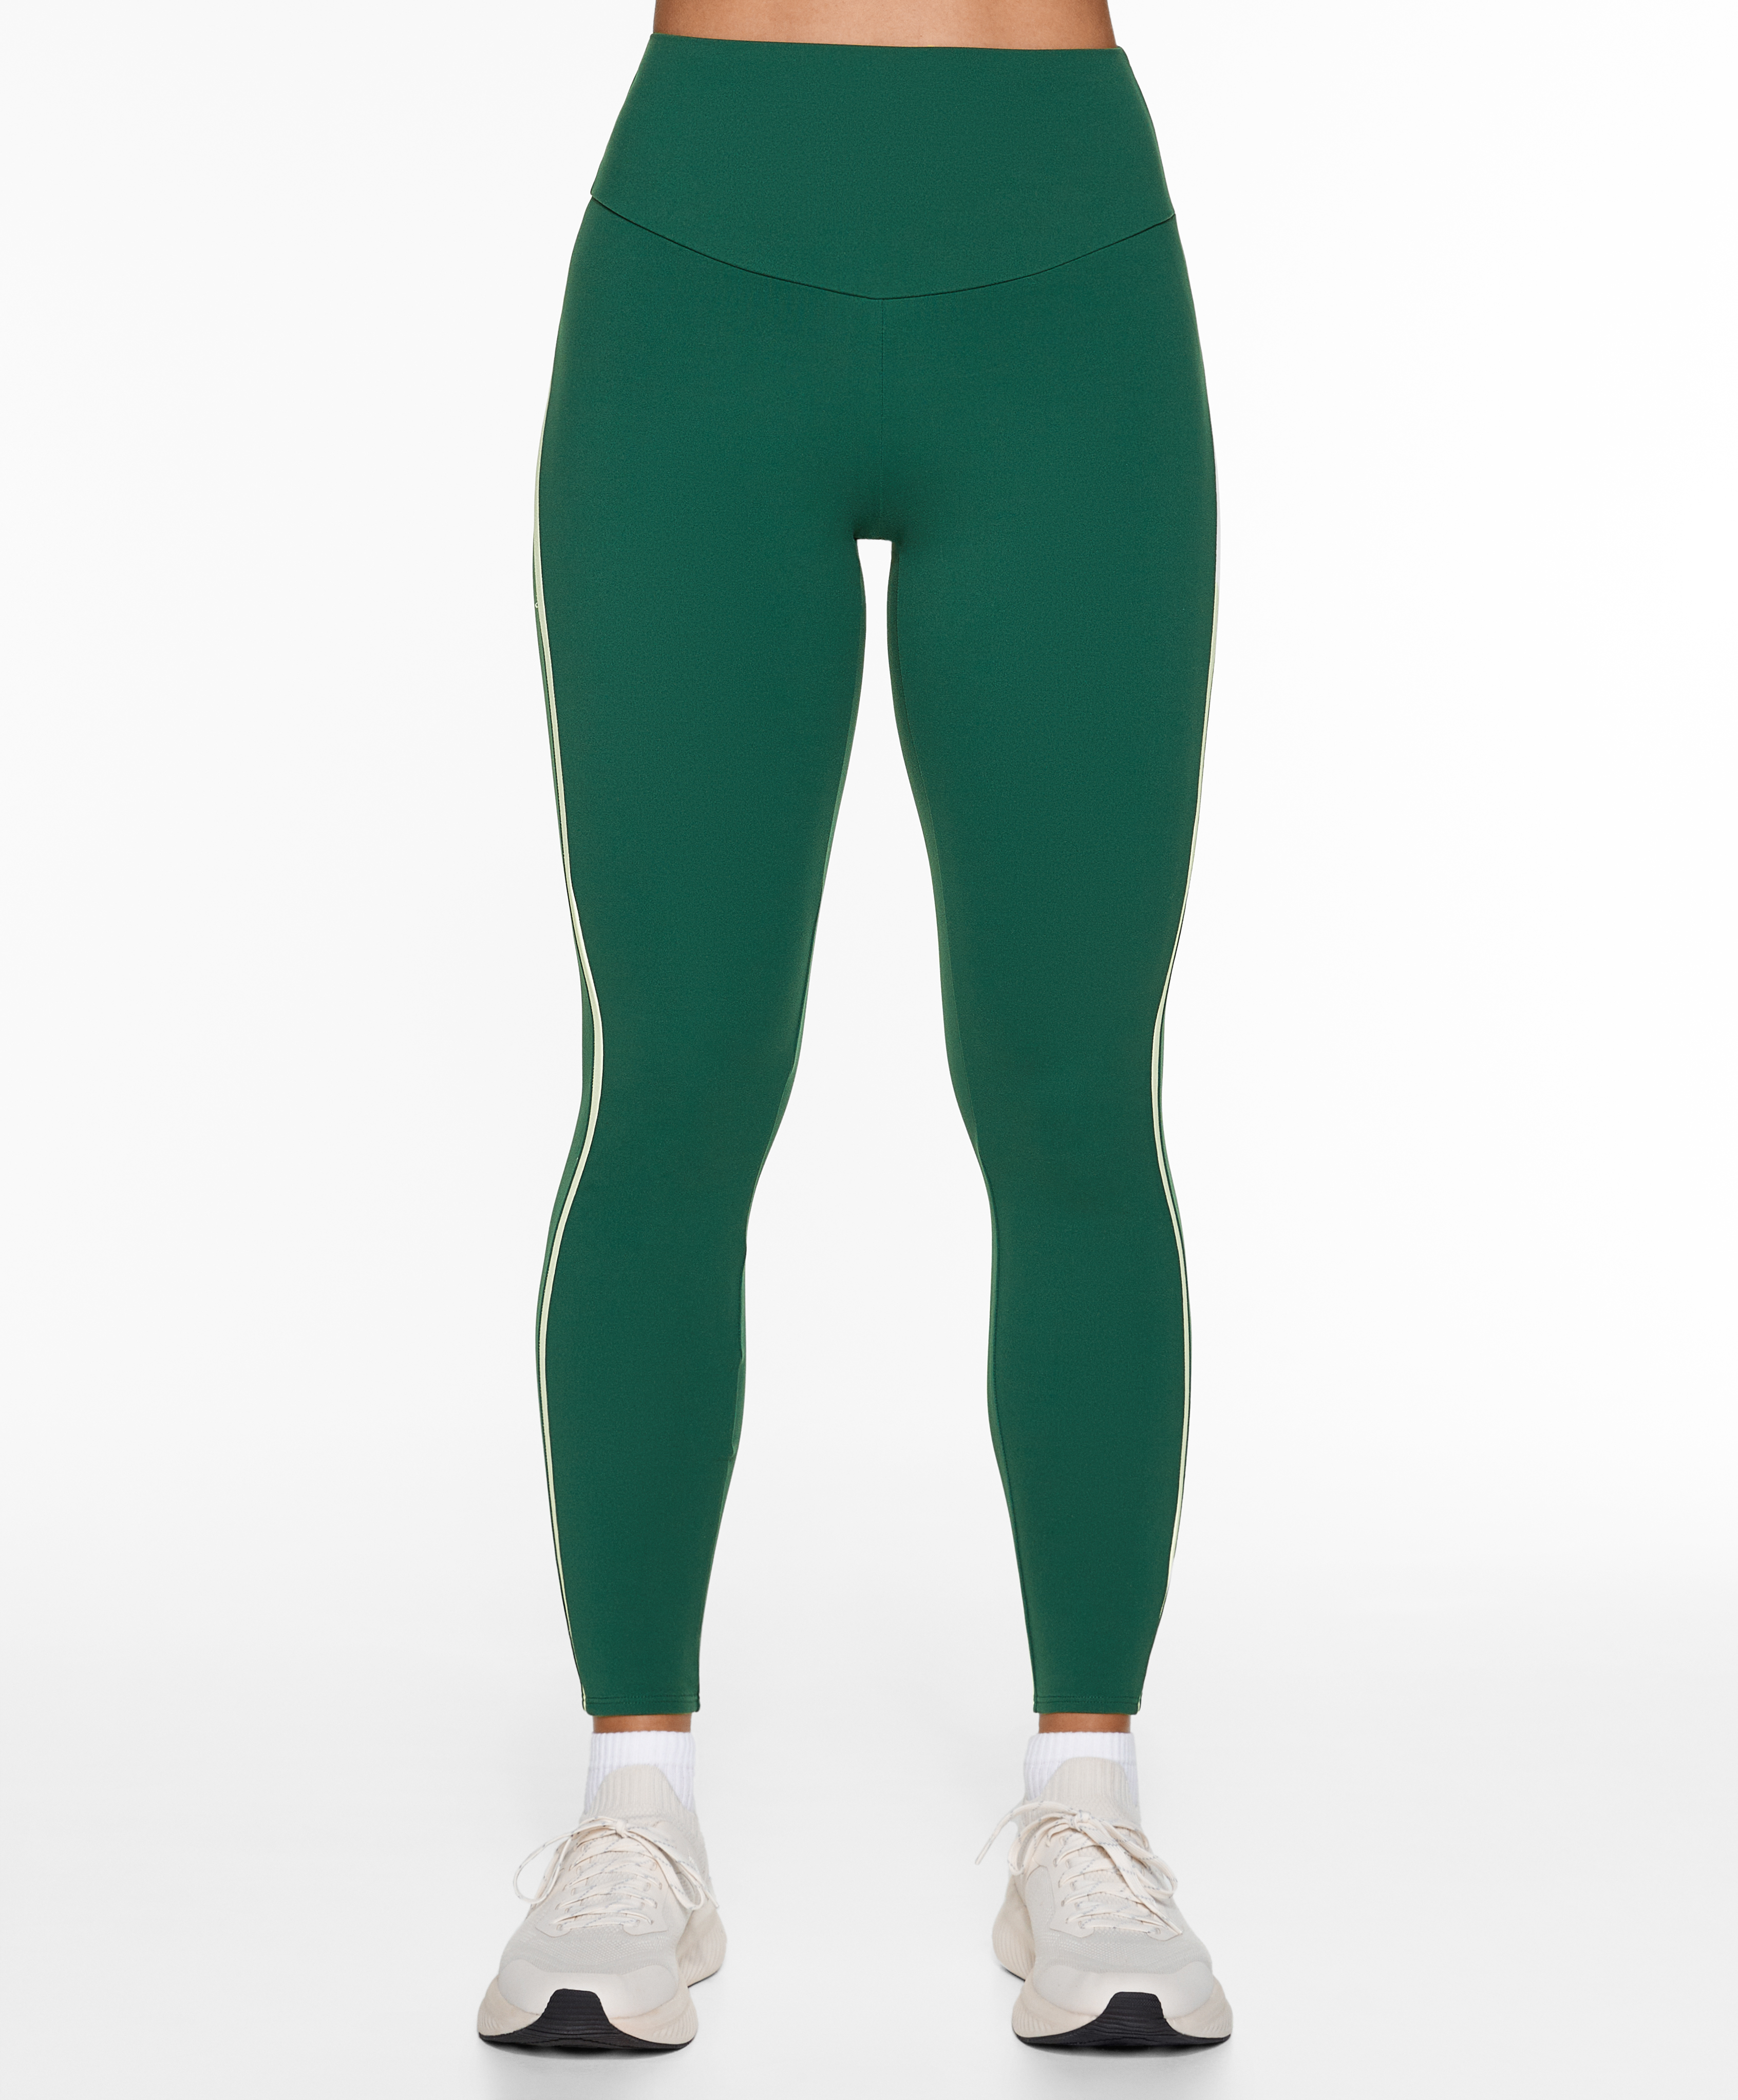 Buy KEX White Green Solid Cotton Ankle Length Legging Combo